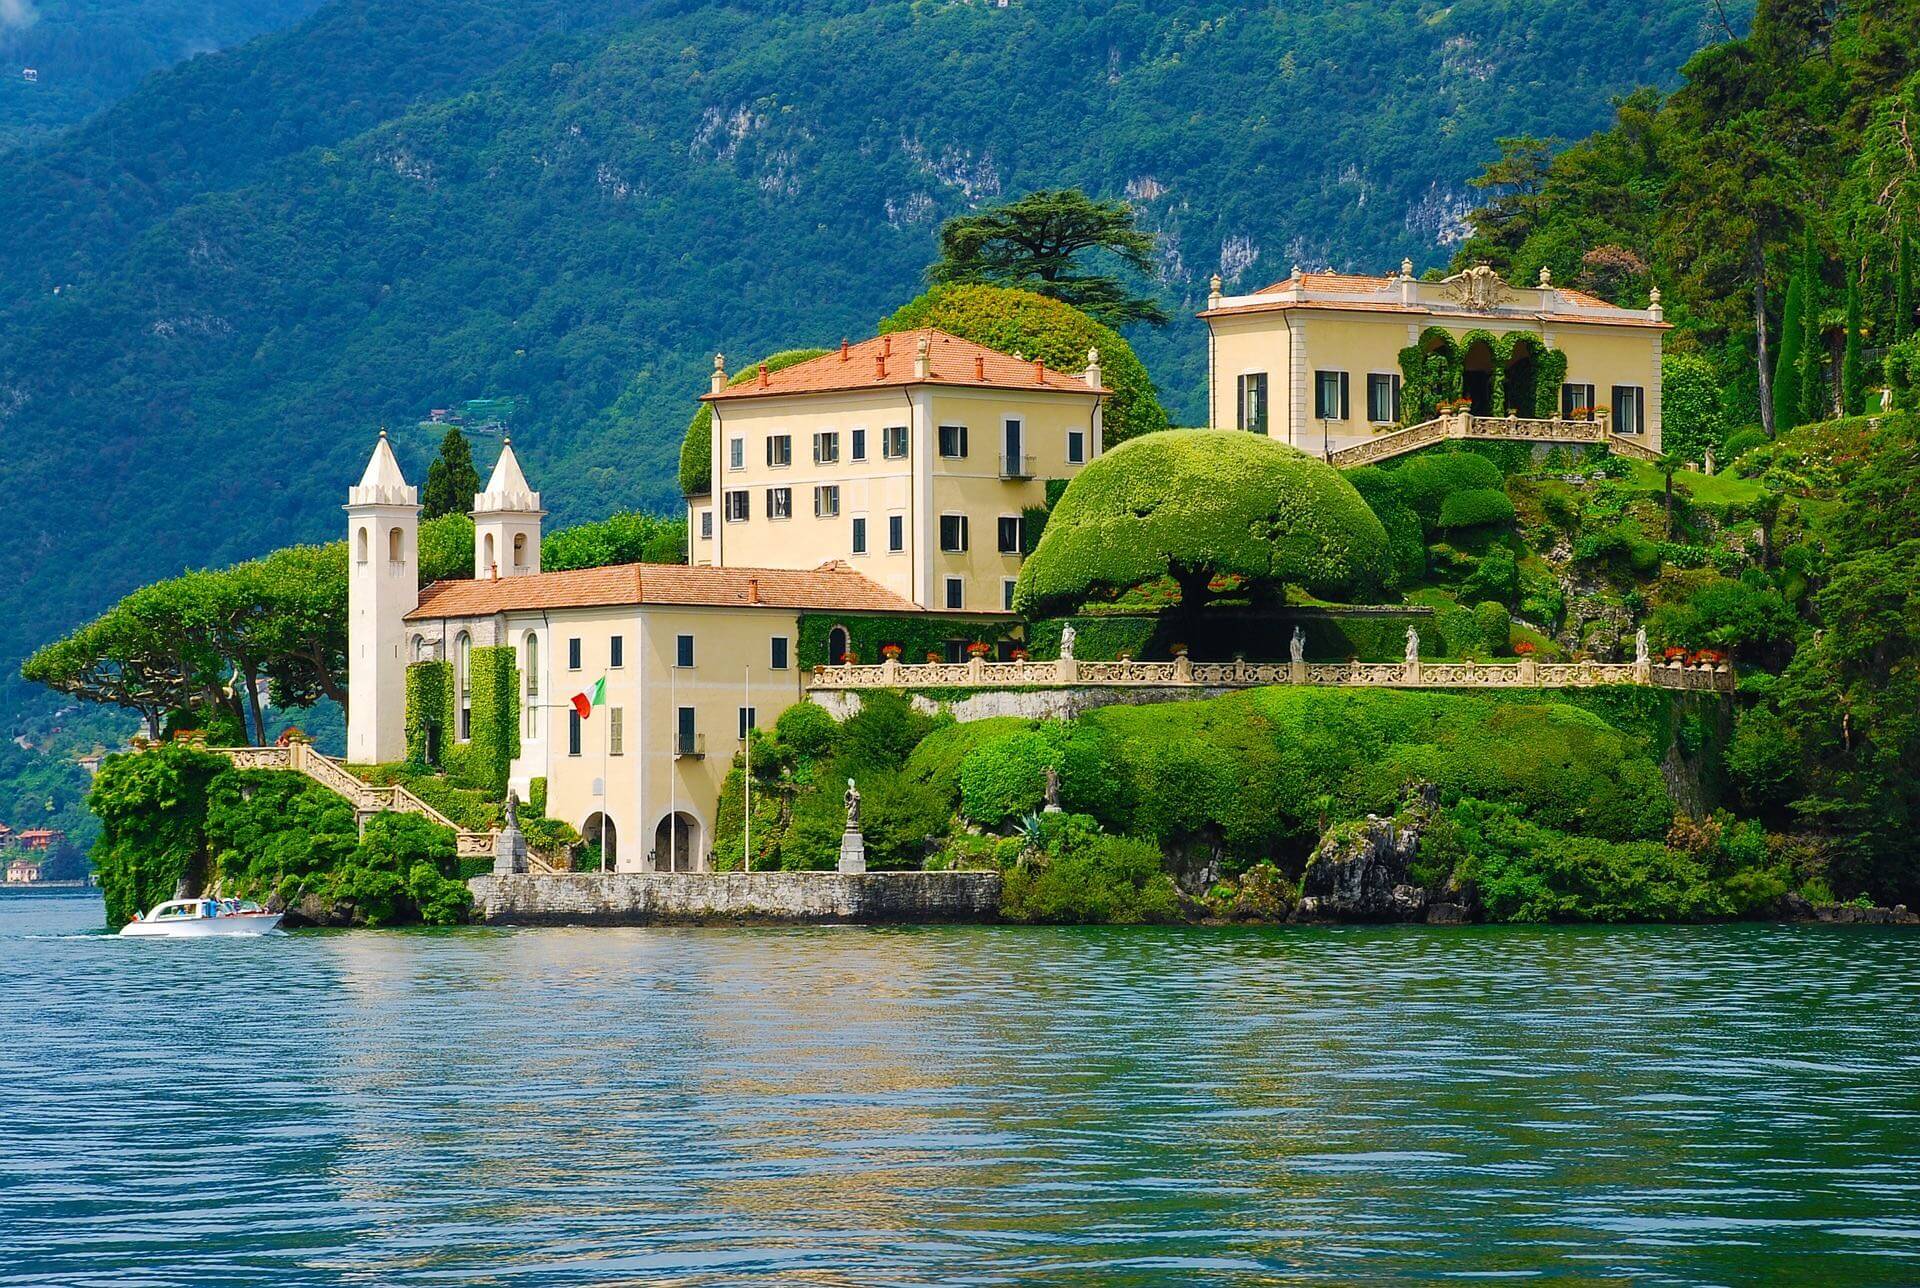 Bellagio, Menaggio, Tremezzina and Varenna, the most beautiful villages of Lake Como open their doors to flavor with SloWeekend